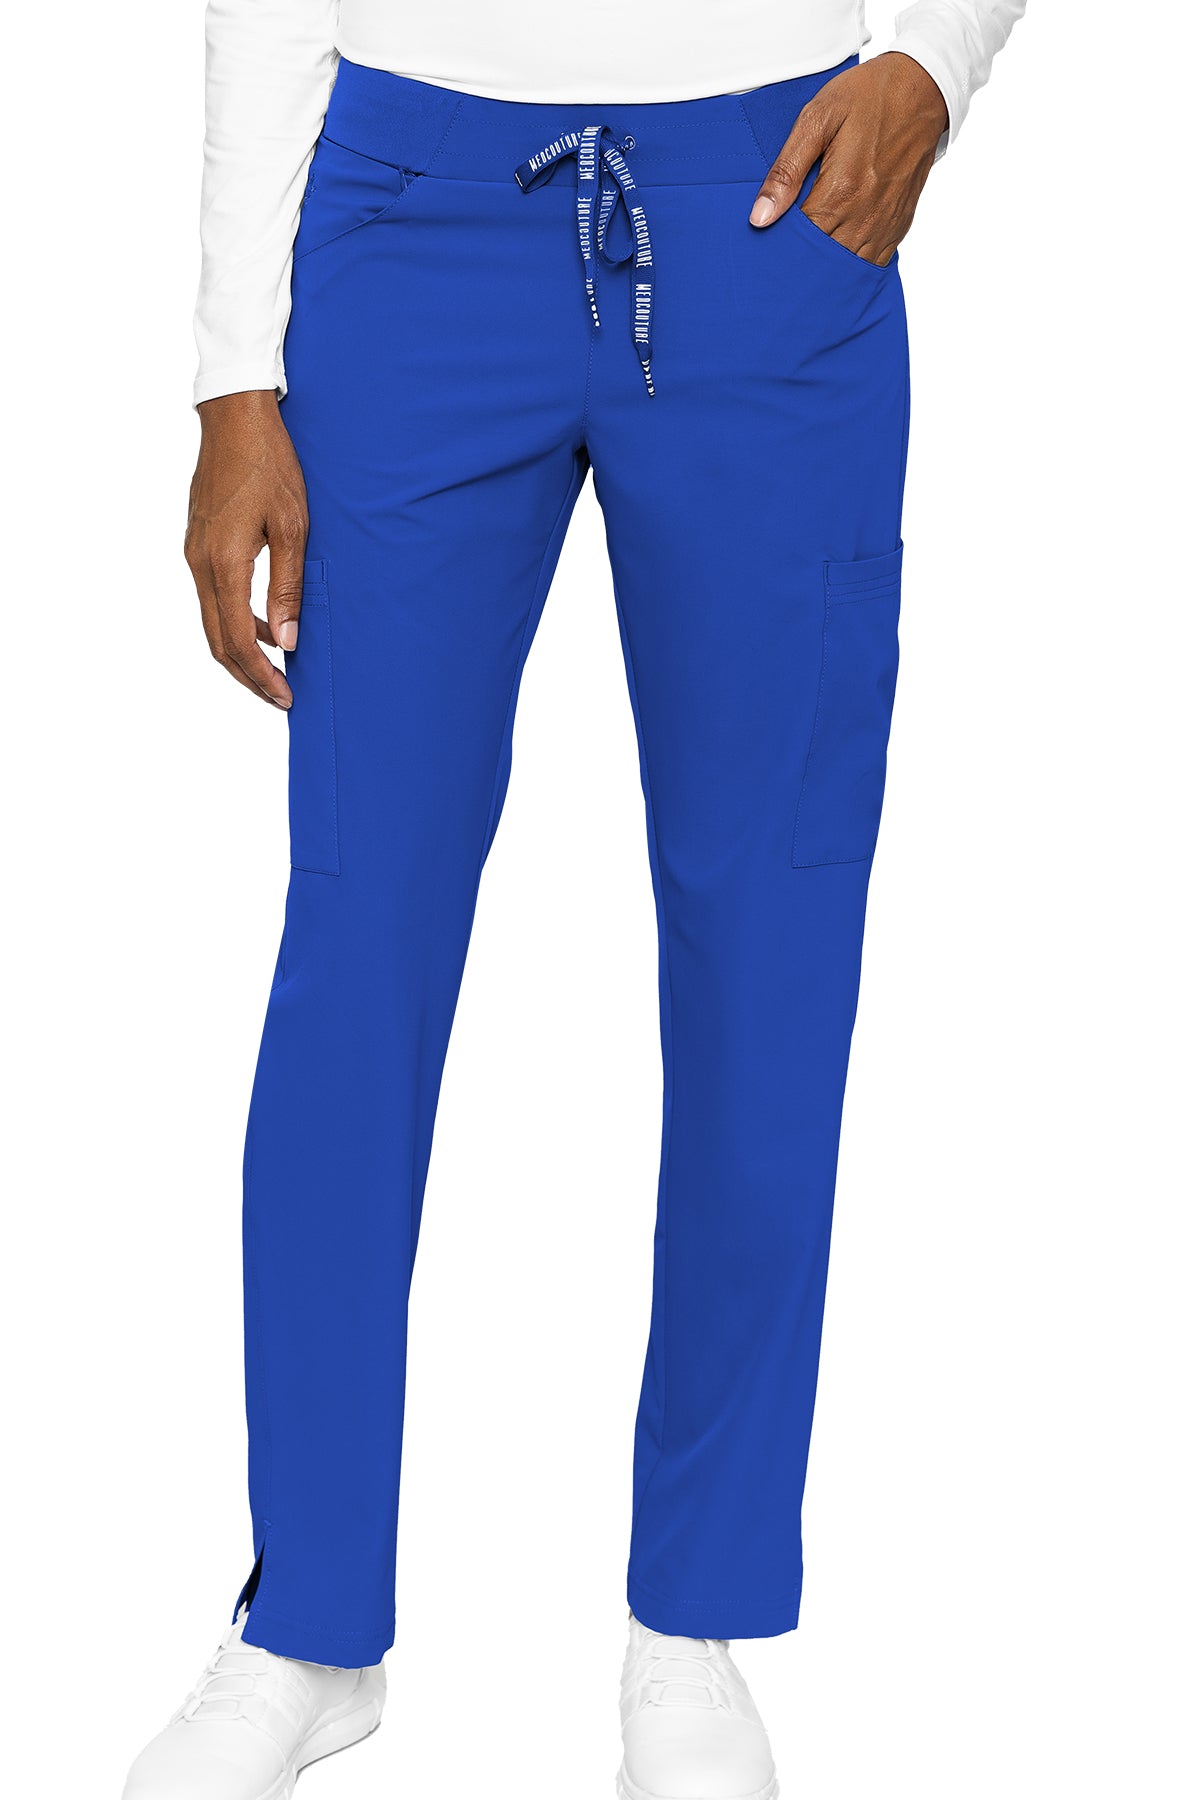 MED COUTURE Scoop Pocket Pant #8733 - Butterfly Touch Scrubs